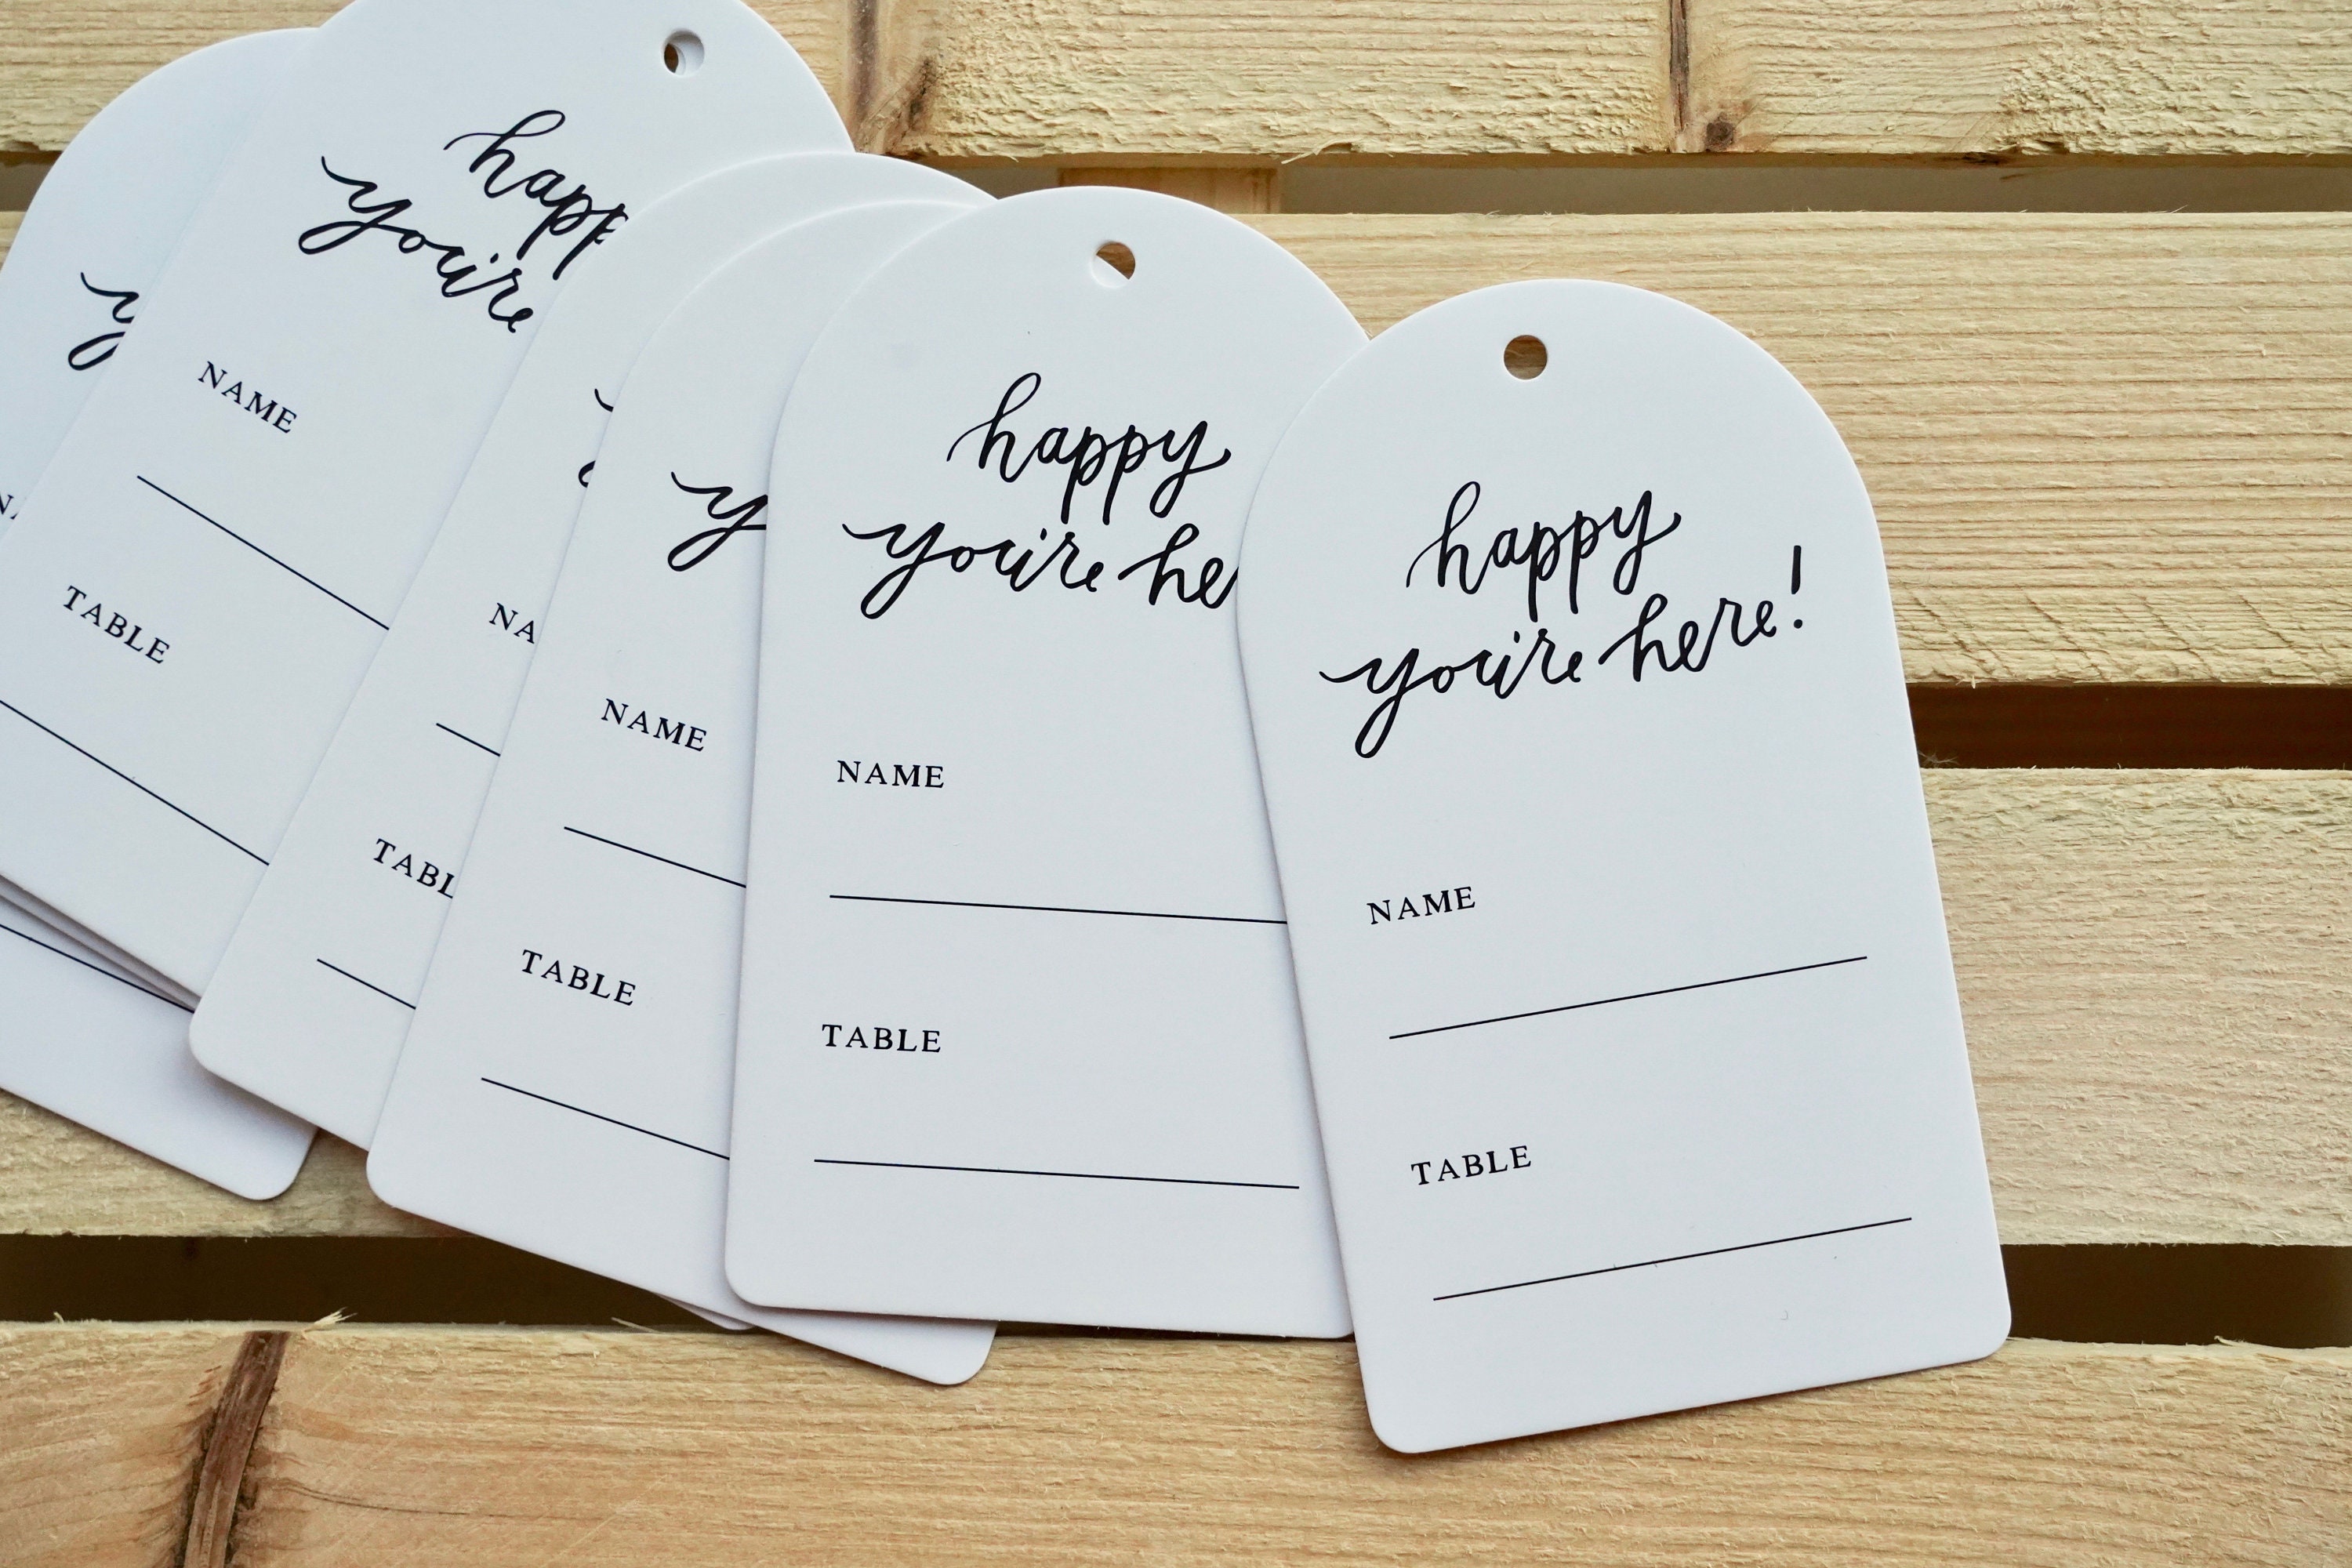 100 Wedding Favor Gift Tags / Place Cards / Escort Tags / Thank You Tags /  Shower Tags / Love Is Sweet / Honey Jar / Jam Labels - Vintage